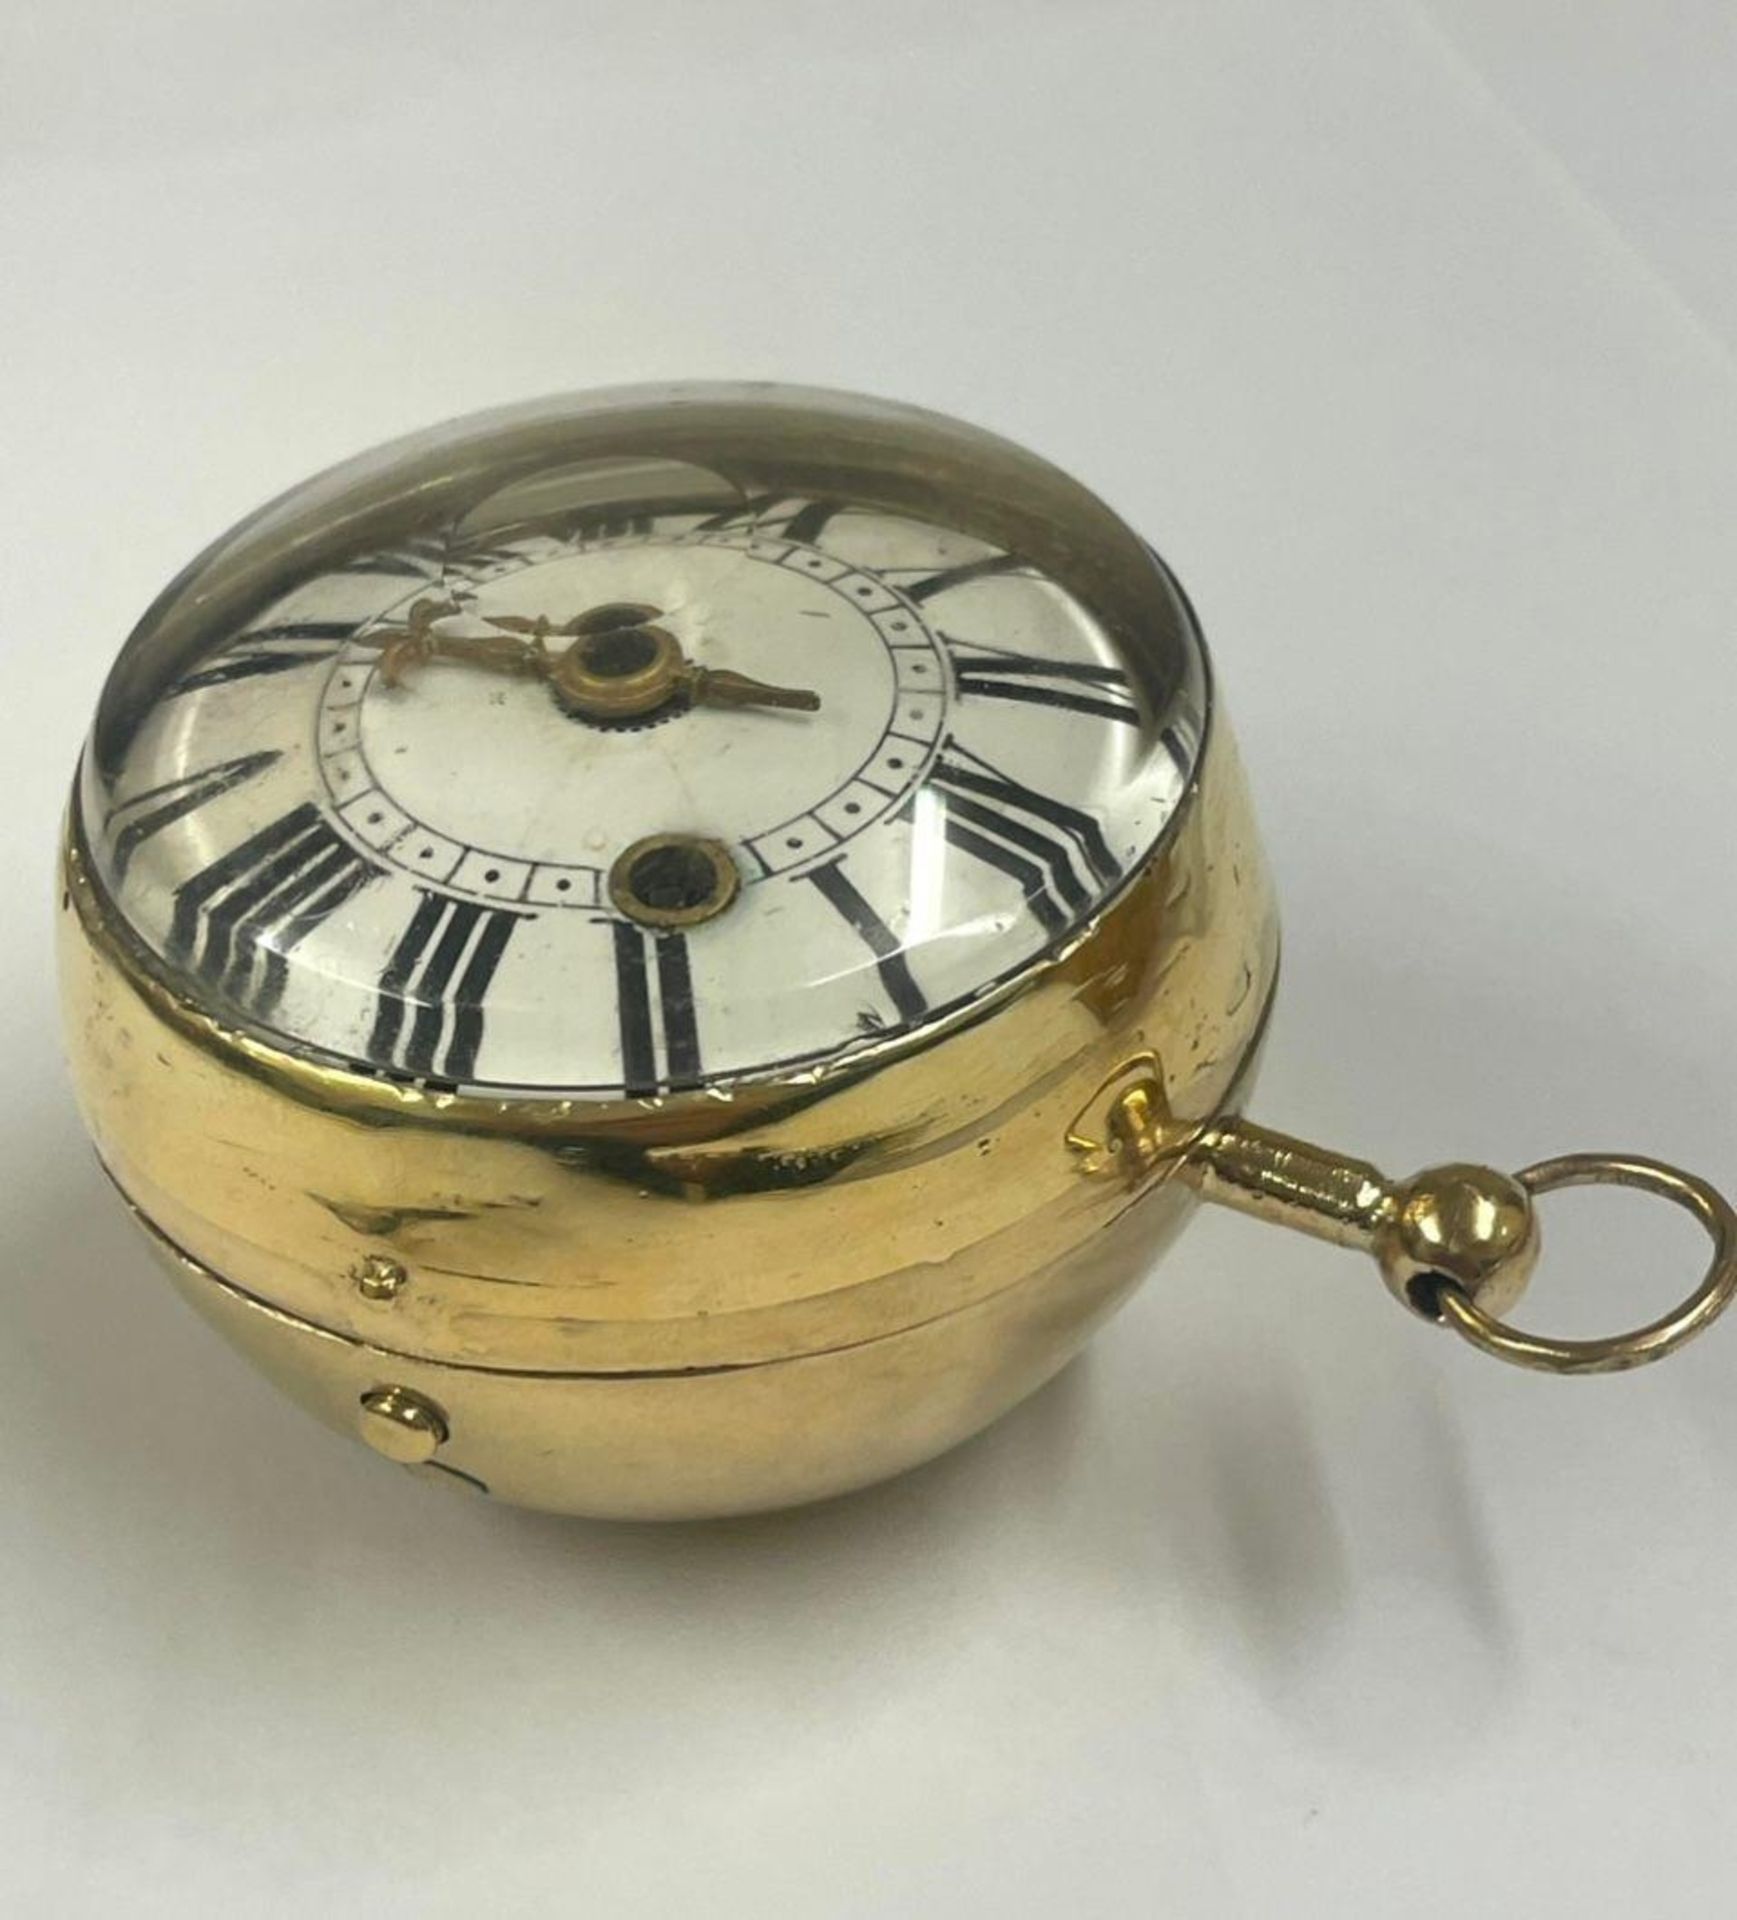 Rare 1600s Oignon single hand Pocket Watch, Girod Copet. French Gilt c1680, Ticks if touch the fly - Image 4 of 18